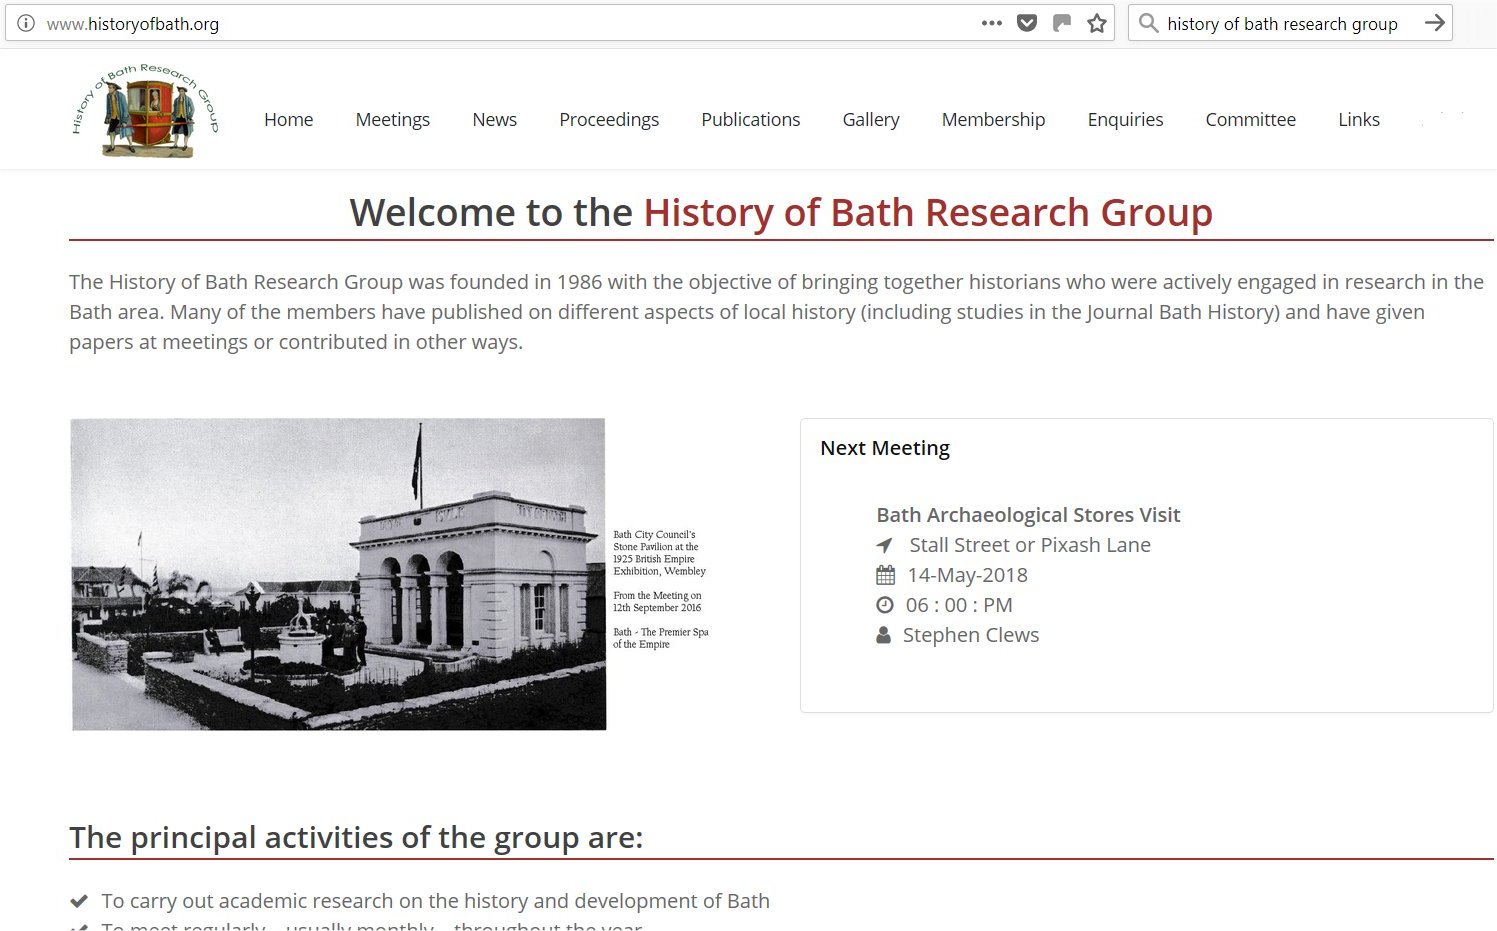 New HBRG Website Launched